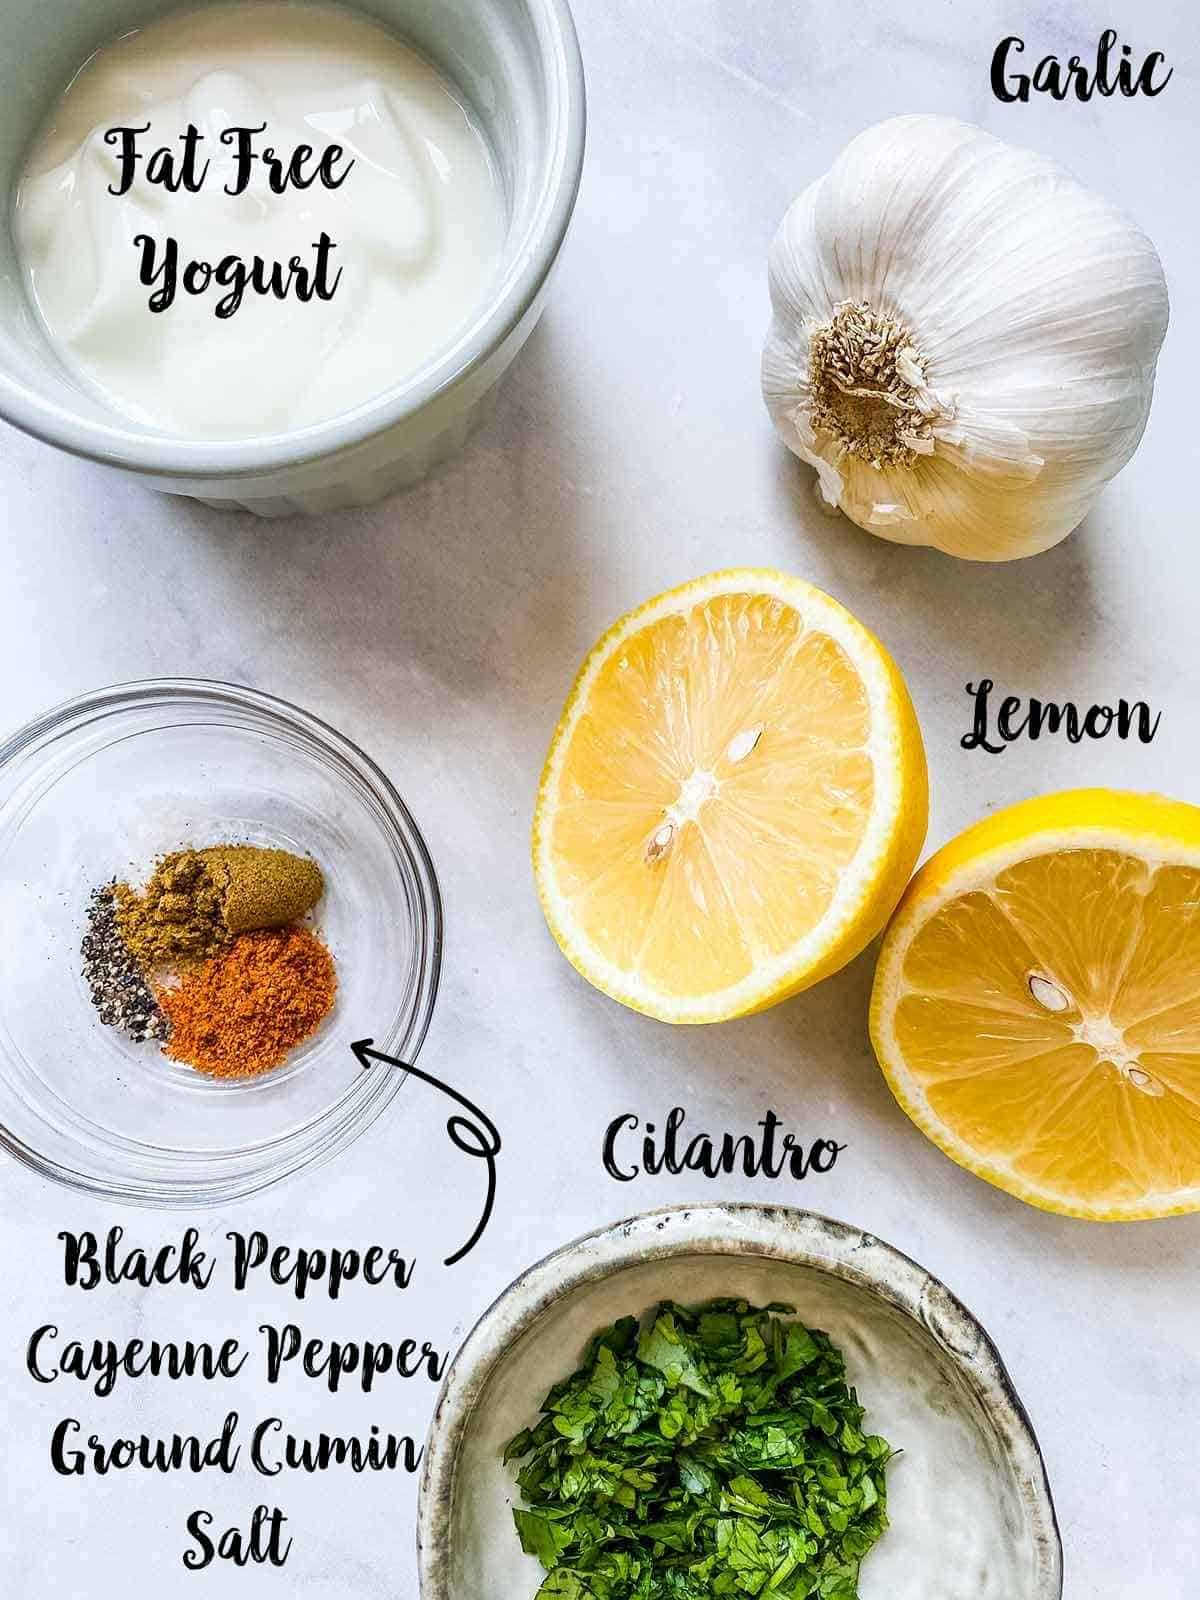 A pot of yogurt, a garlic bulb, a lemon, some spices and a bowl of chopped cilantro on a white table all with text labels.